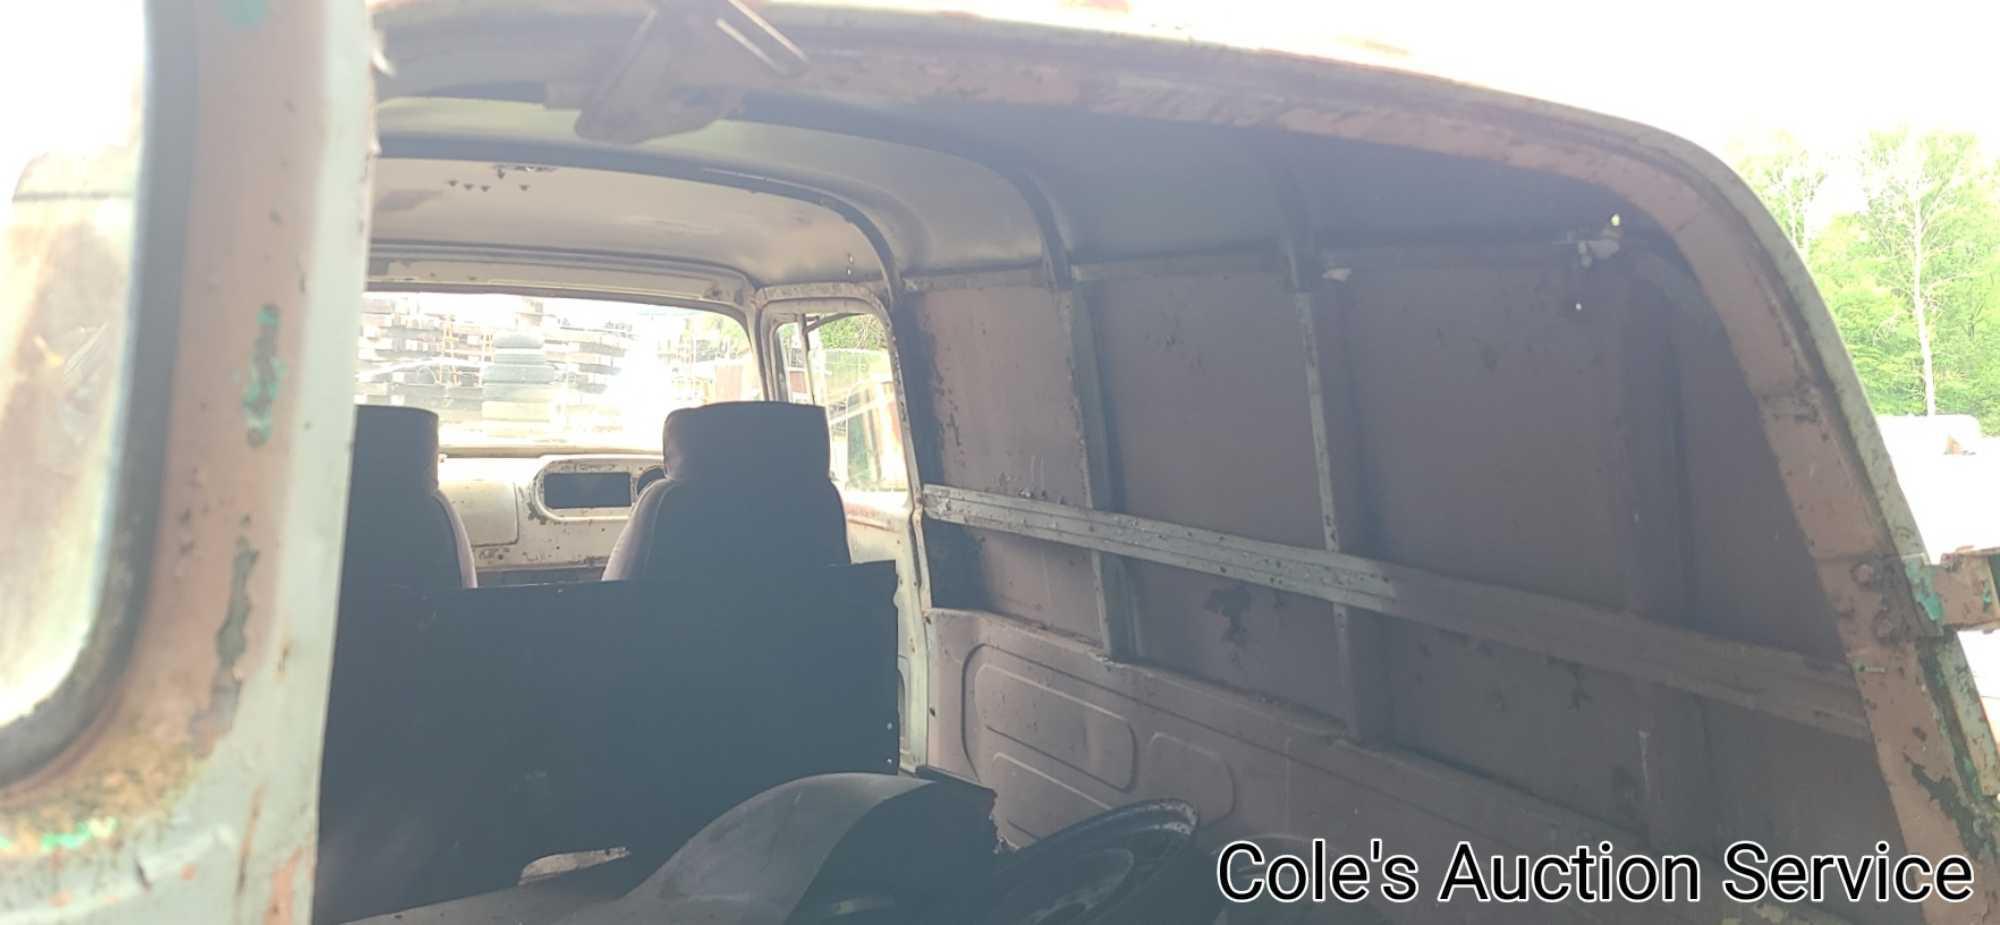 1956 Dodge sedan delivery truck. Solid rolling chassis restoration project from California with